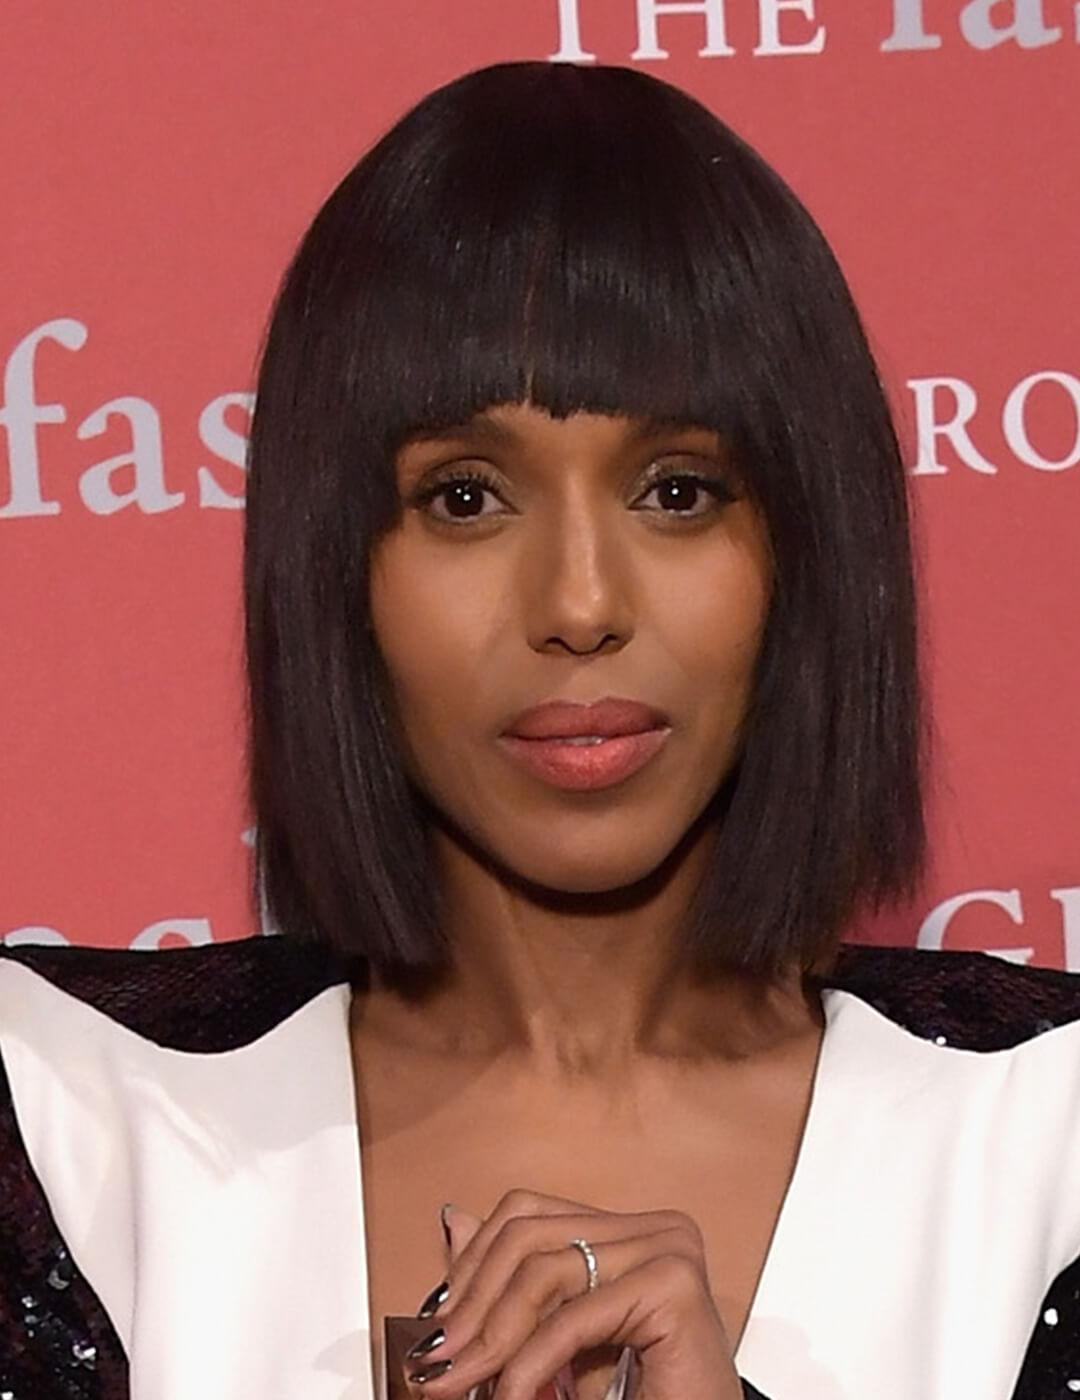 Kerry Washington looking fierce with blunt bangs and black and white outfit at the red carpet